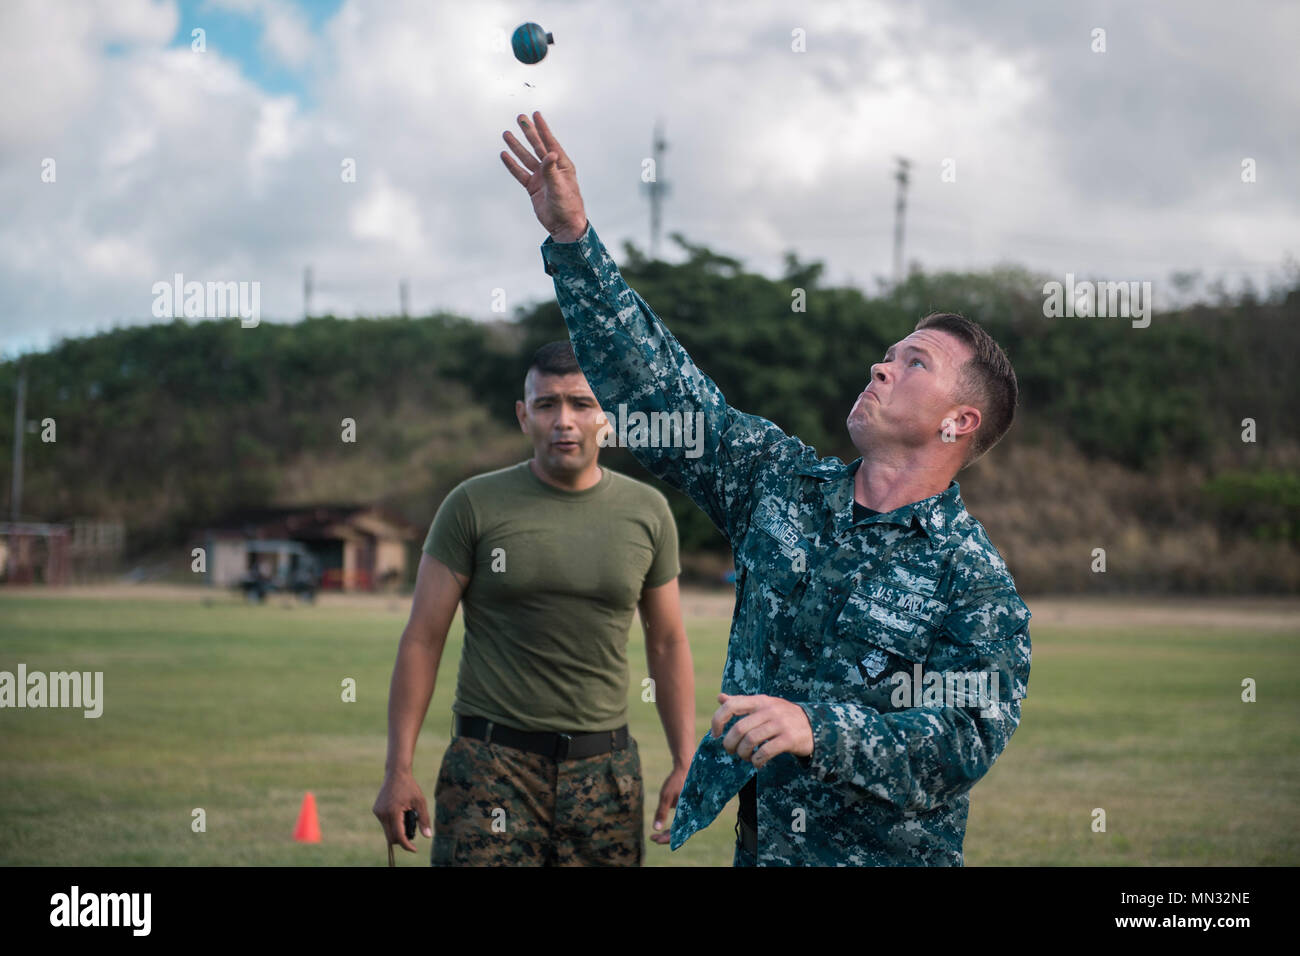 170824-N-AV234-0202 PEARL HARBOR (Aug. 24, 2017) USS Missouri Chief Petty Officer Legacy Academy Class 016 member Chief (Select) Aviation Structural Mechanic Jaymes Tanner participates in the Marine Corps Combat Fitness Test at Camp H. M. Smith, Hawaii. The CPO Legacy Academy is a six-day course in which the chief petty officers and selectees live aboard The USS Battleship Missouri Memorial and participate in preservation activities, leadership training, reenact scenarios that took place onboard USS Missouri, and learn lessons about the history and heritage of the U.S. Navy and CPO community.  Stock Photo